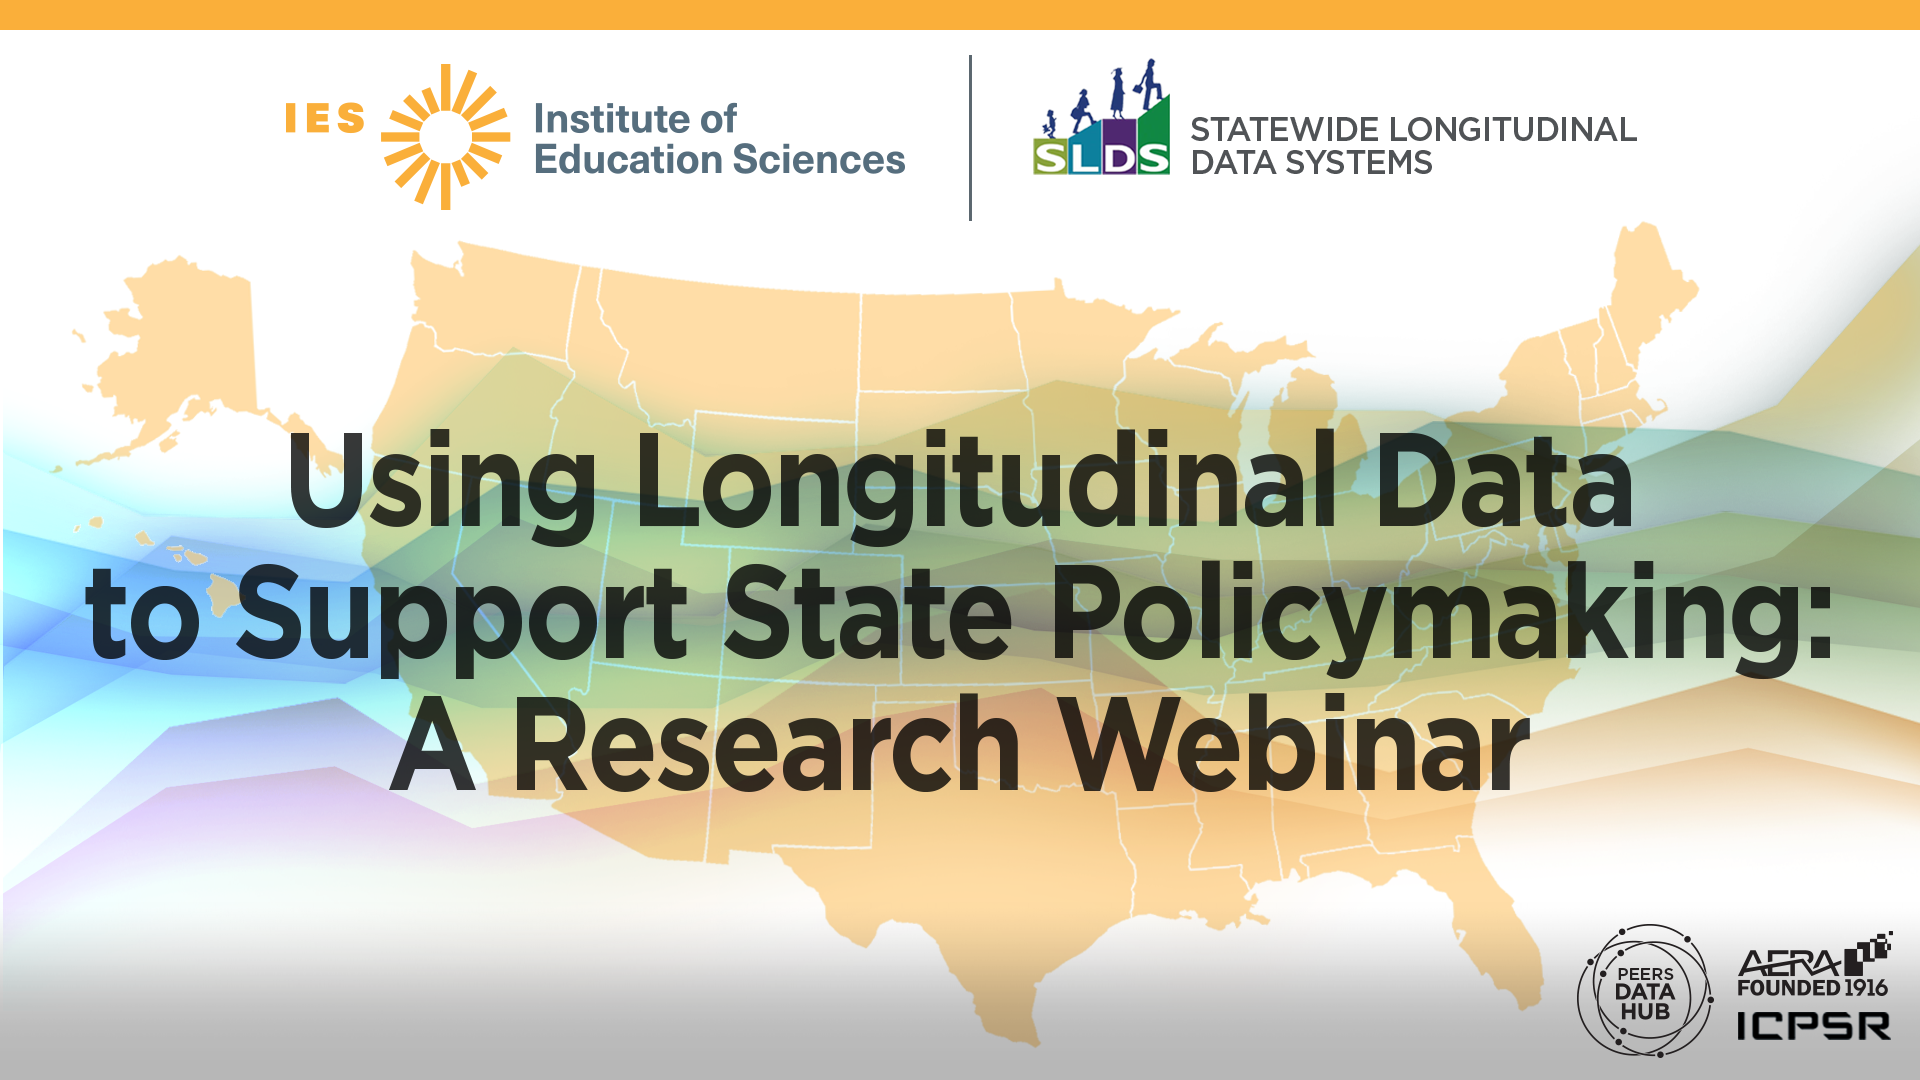 Using Longitudinal Data to Support State Policymaking: A Research Webinar